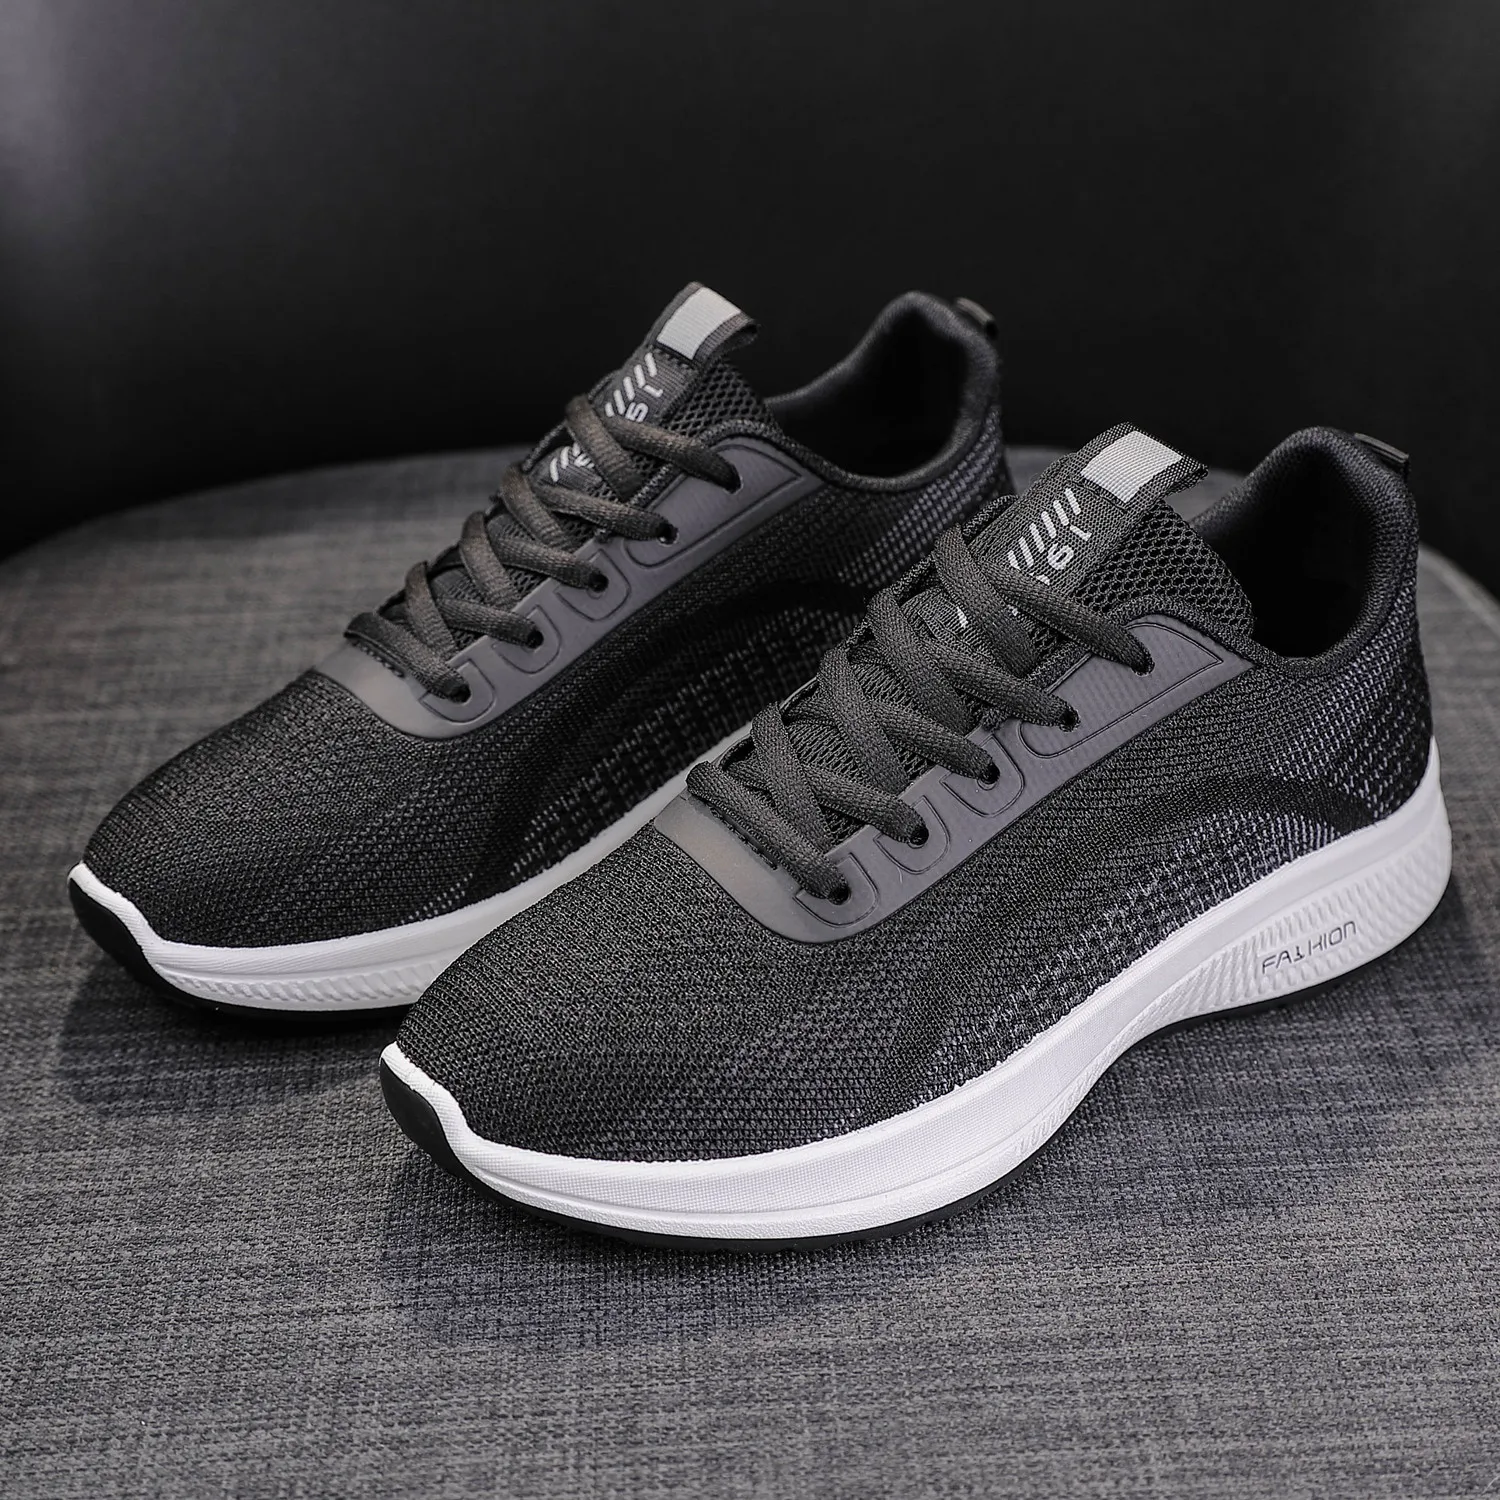 Wholesale Hard-Wearing Walking Soft sole Breathable Casual Sneakers women Running Shoes